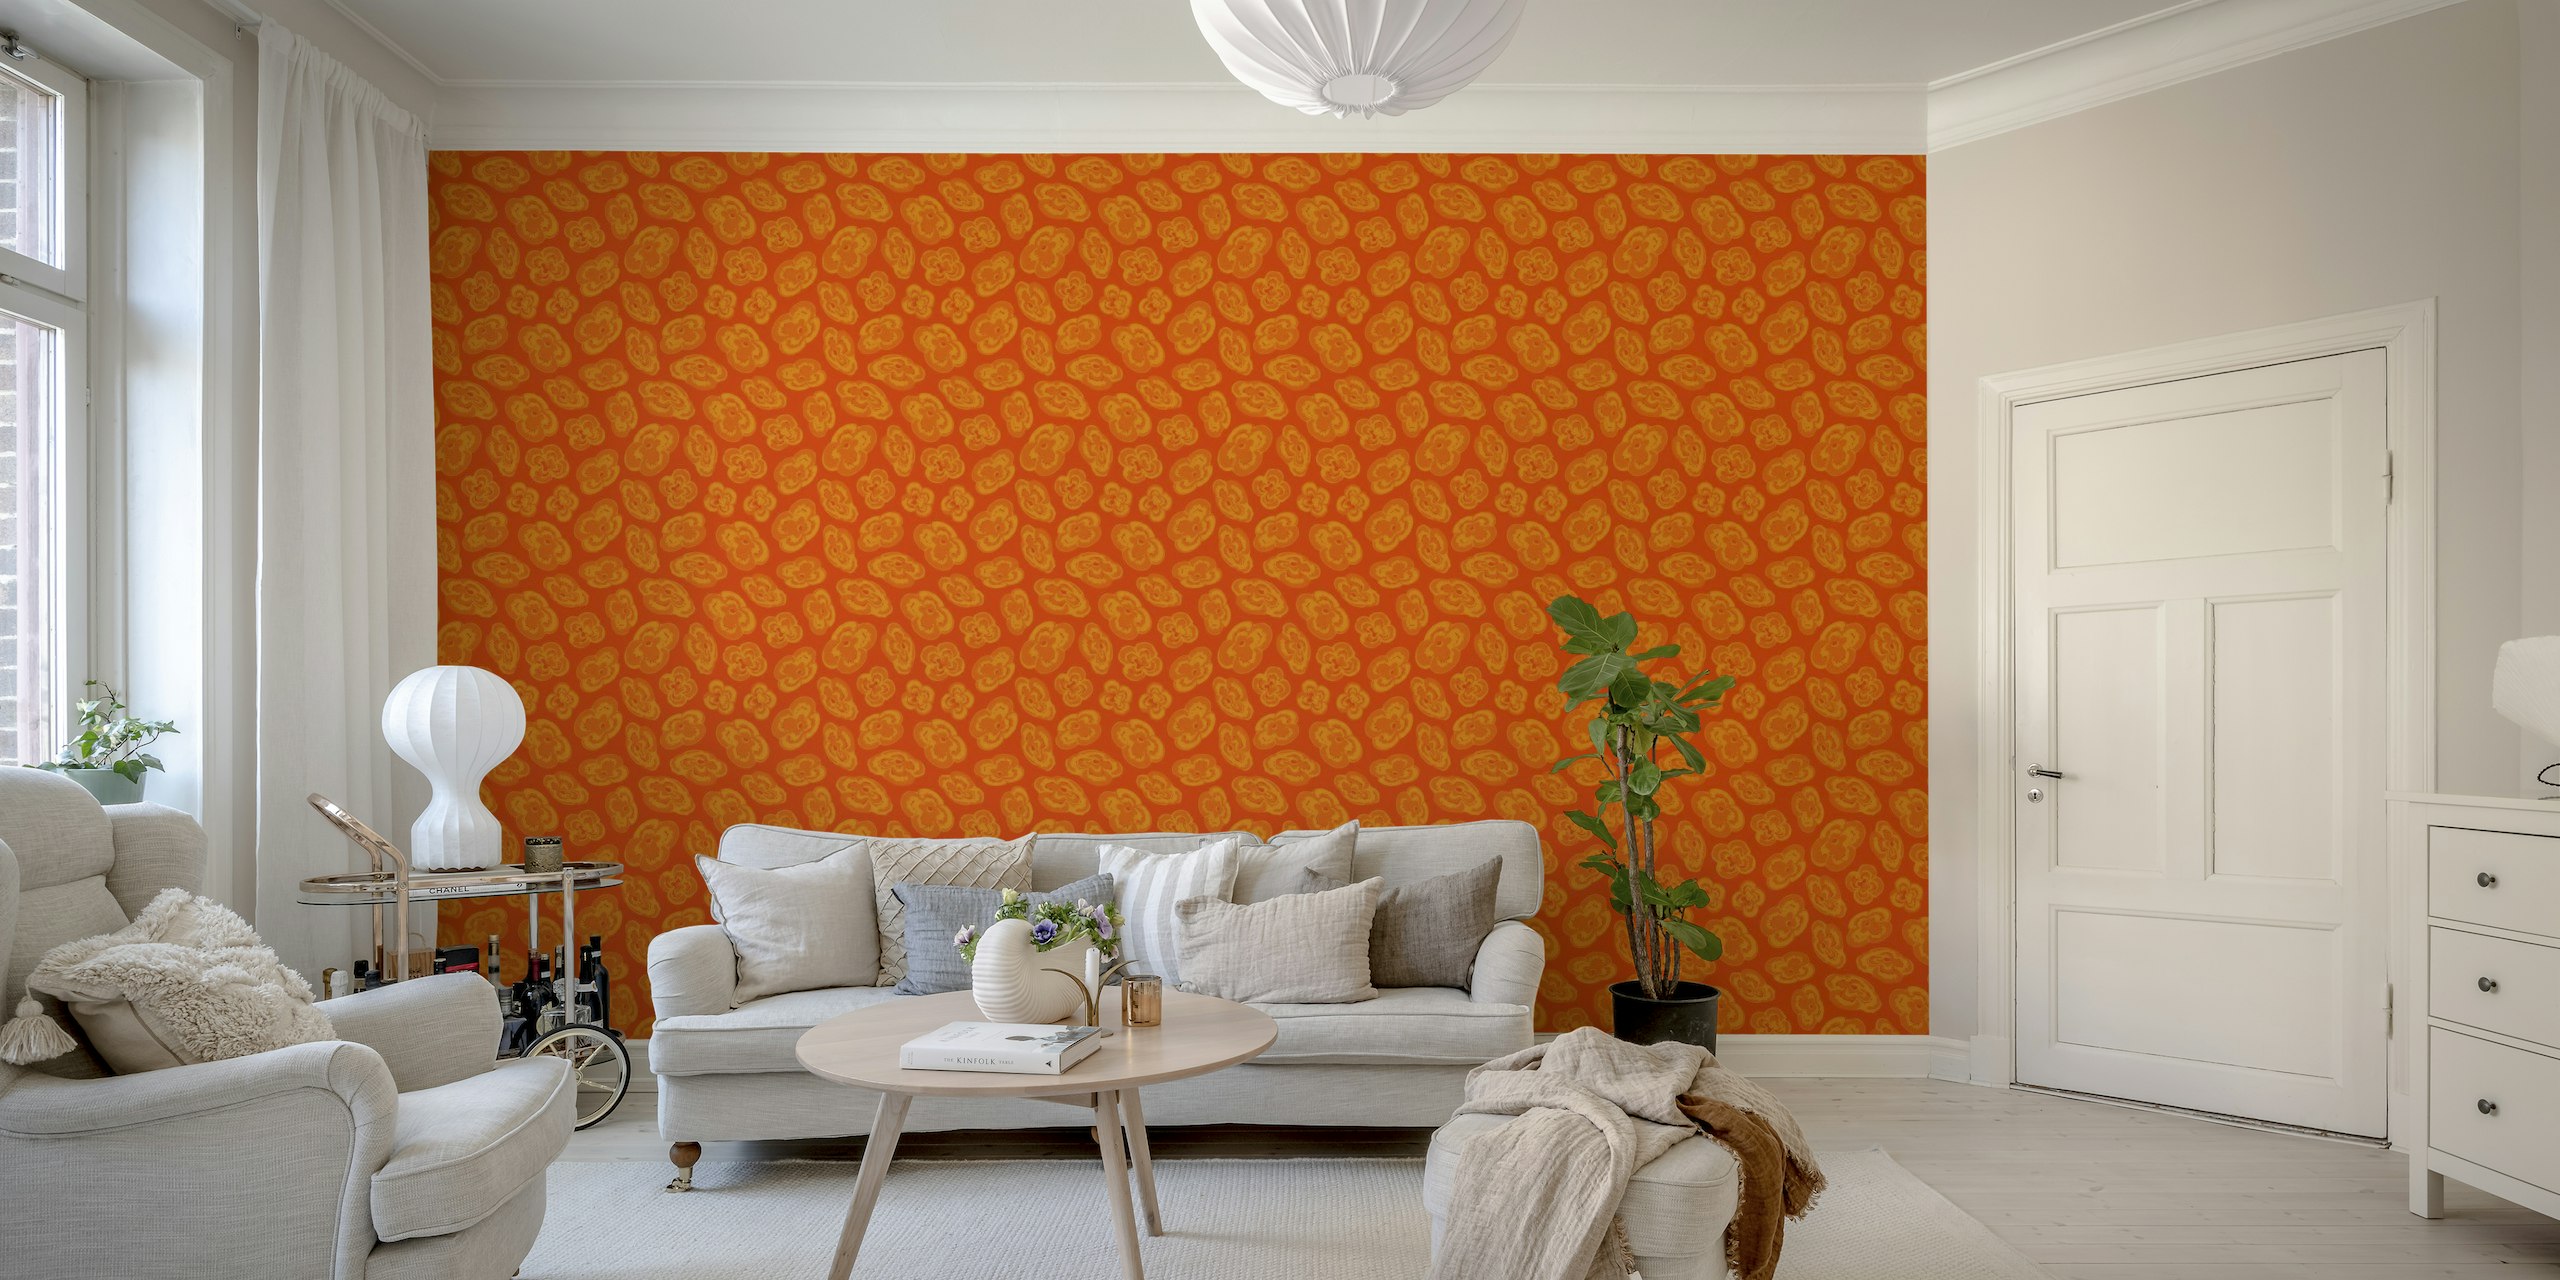 FLOATING LILIES Abstract Floral - Orange papel pintado